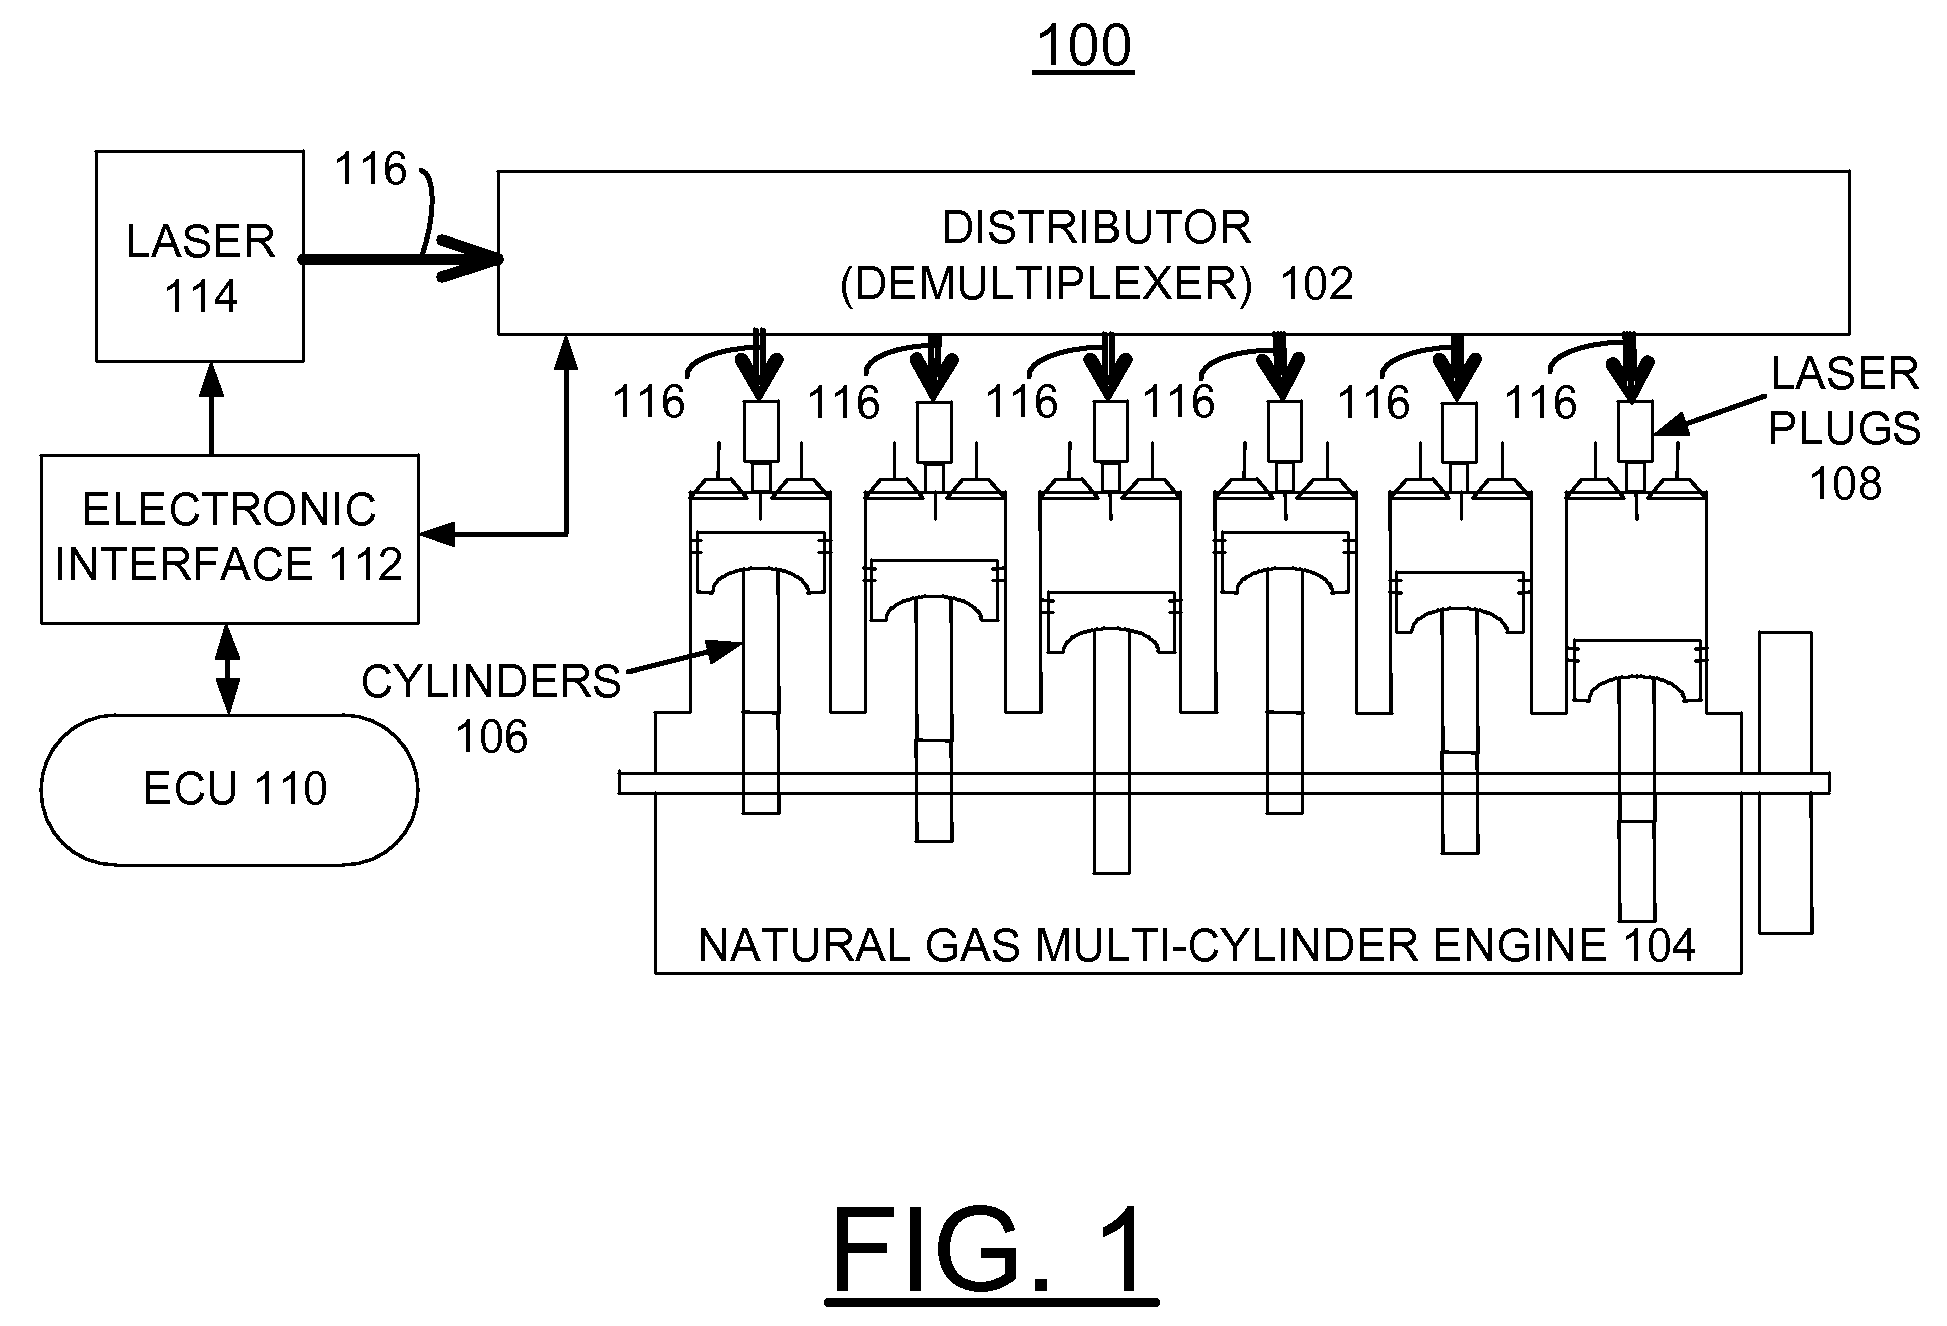 Method and system to distribute high-energy laser pulses to multiple channels